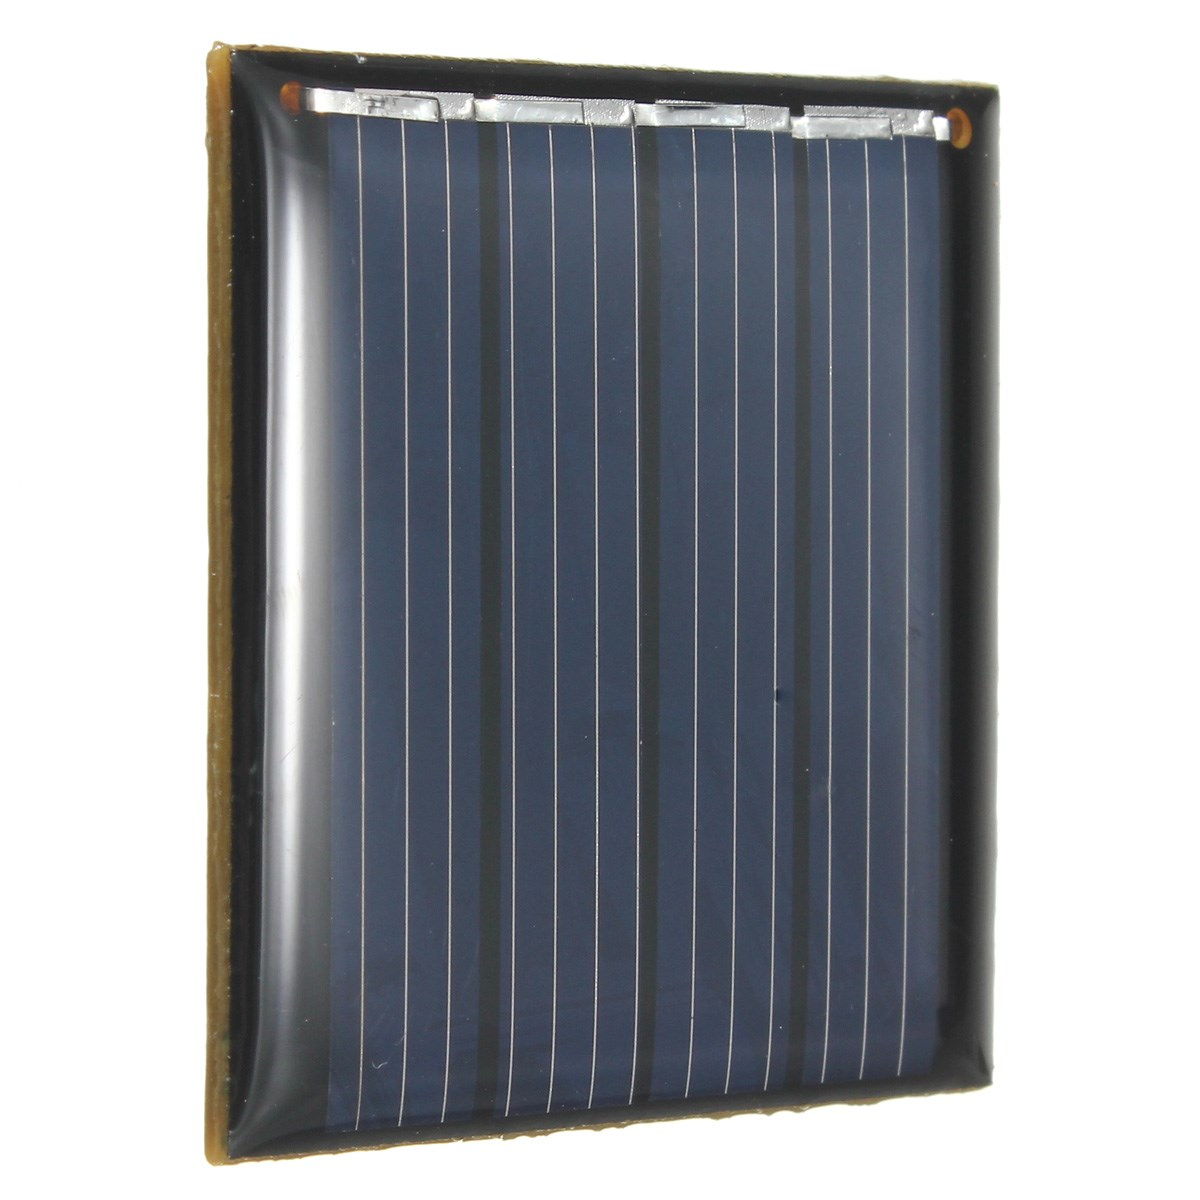 2V 0.14W Epoxy Battery Plate Polycrystalline Silicon Cell Batteries DIY Solar Powered Panels Solar Panel Cell Model 40 x 40x3mm 7